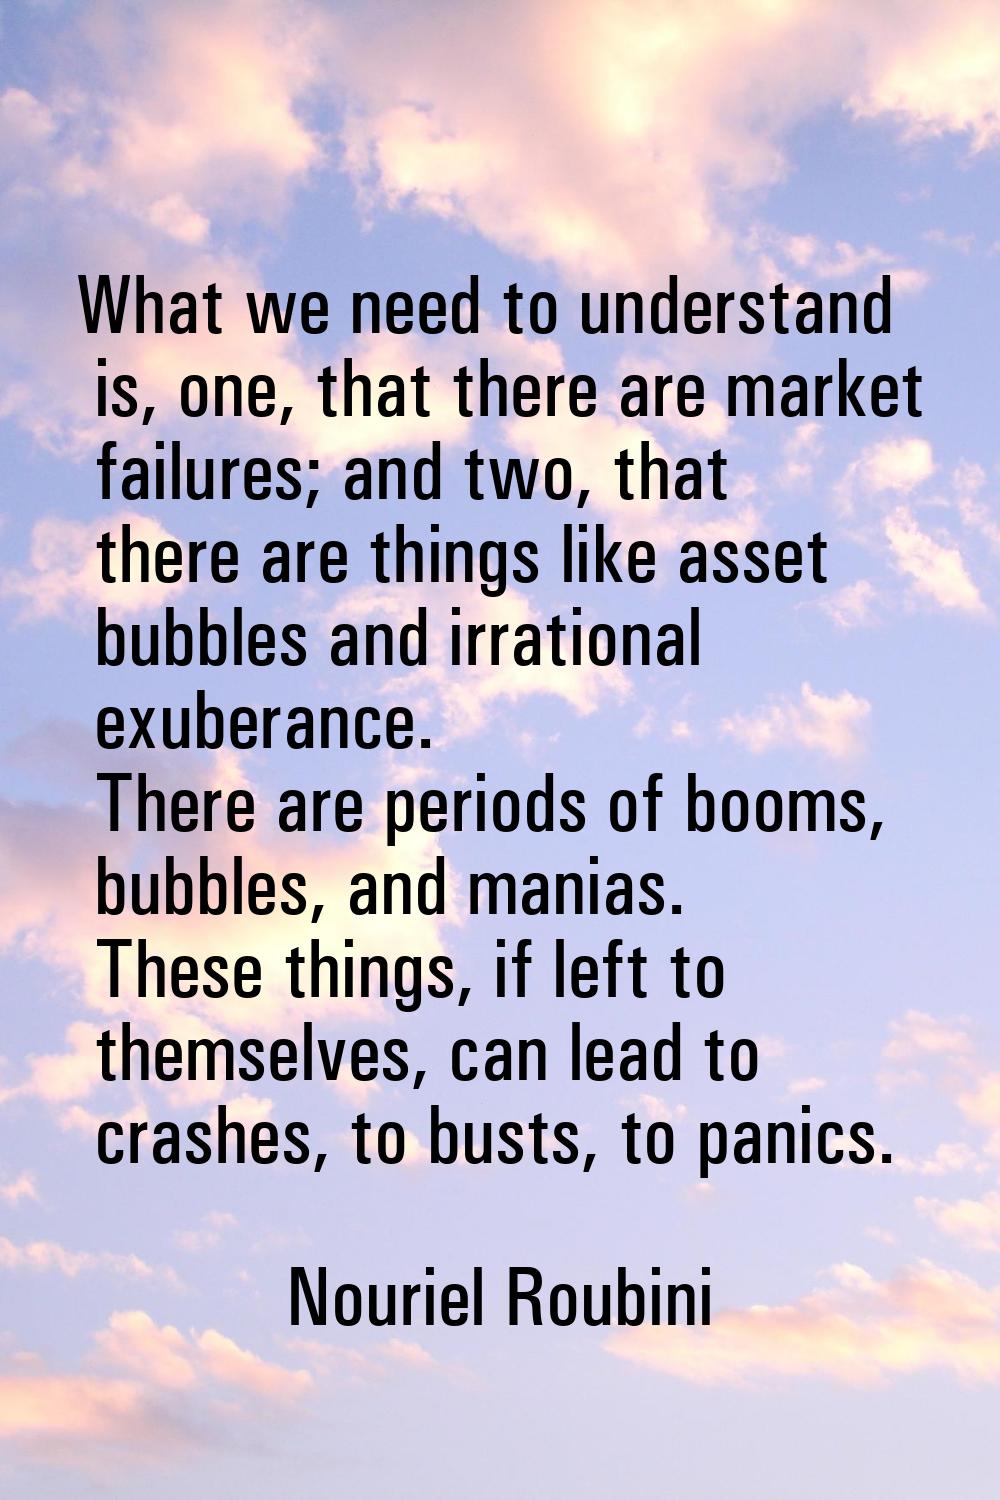 What we need to understand is, one, that there are market failures; and two, that there are things 